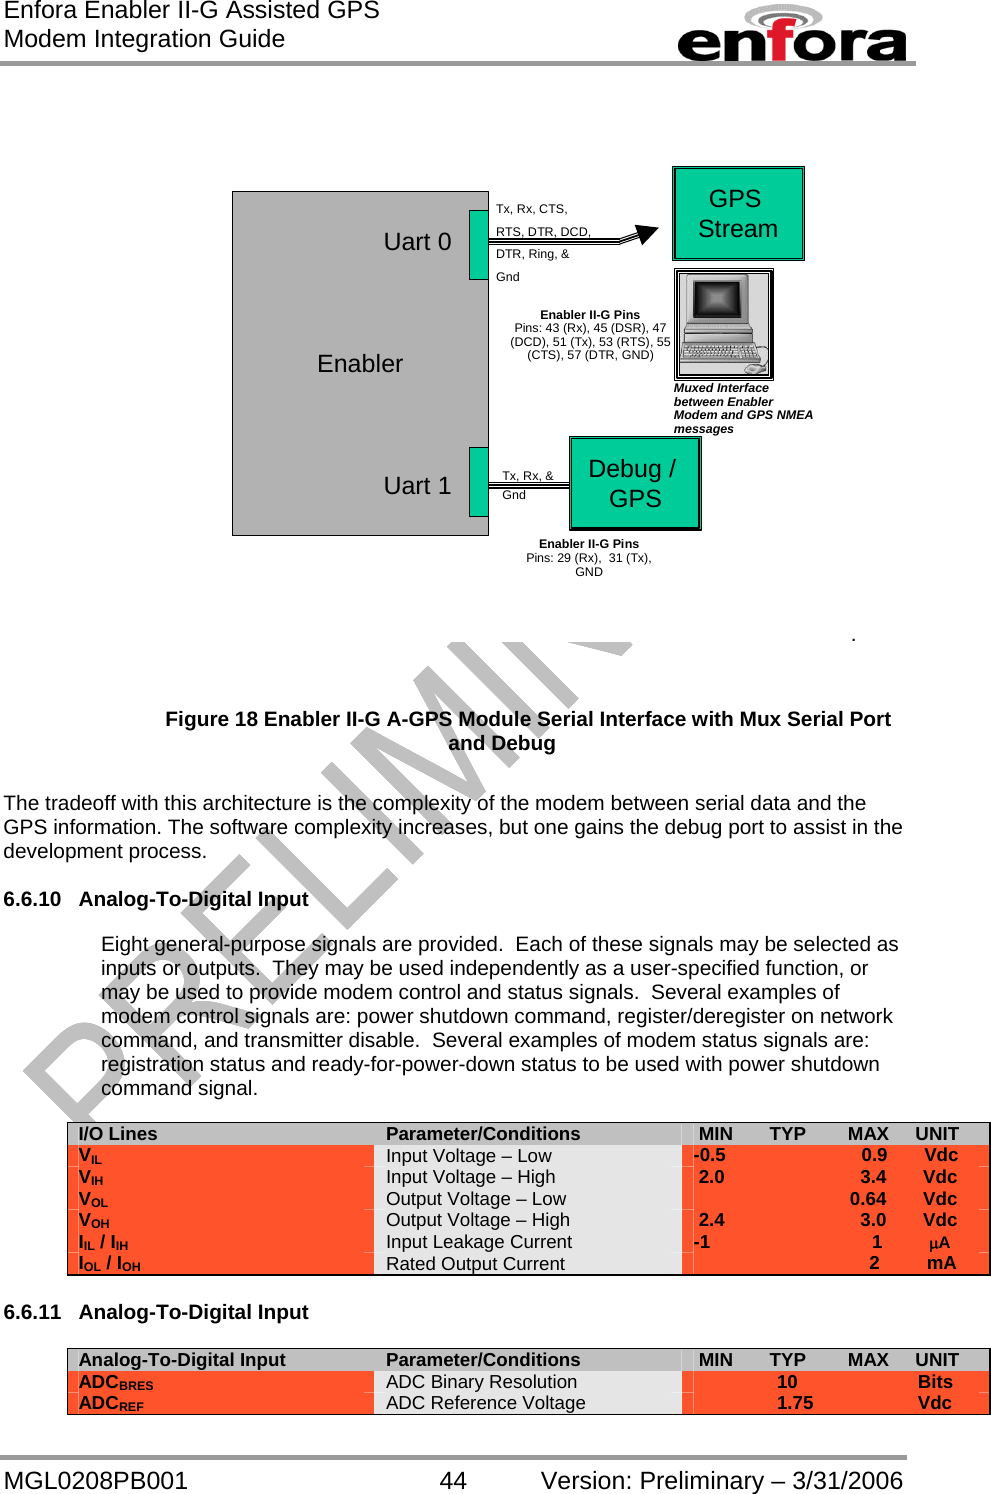 Enfora Enabler II-G Assisted GPS Modem Integration Guide MGL0208PB001 44 Version: Preliminary – 3/31/2006 EnablerUart 1Uart 0Debug / GPSTx, Rx, &amp; GndTx, Rx, CTS, RTS, DTR, DCD, DTR, Ring, &amp; GndEnabler II-G PinsPins: 43 (Rx), 45 (DSR), 47 (DCD), 51 (Tx), 53 (RTS), 55 (CTS), 57 (DTR, GND)Enabler II-G PinsPins: 29 (Rx),  31 (Tx), GNDGPS StreamMuxed Interface between Enabler Modem and GPS NMEA messages.      Figure 18 Enabler II-G A-GPS Module Serial Interface with Mux Serial Port and Debug  The tradeoff with this architecture is the complexity of the modem between serial data and the GPS information. The software complexity increases, but one gains the debug port to assist in the development process.  6.6.10 Analog-To-Digital Input  Eight general-purpose signals are provided.  Each of these signals may be selected as inputs or outputs.  They may be used independently as a user-specified function, or may be used to provide modem control and status signals.  Several examples of modem control signals are: power shutdown command, register/deregister on network command, and transmitter disable.  Several examples of modem status signals are: registration status and ready-for-power-down status to be used with power shutdown command signal.   I/O Lines Parameter/Conditions   MIN       TYP        MAX     UNIT VIL  Input Voltage – Low  -0.5                          0.9       Vdc VIH  Input Voltage – High   2.0                          3.4       Vdc VOL  Output Voltage – Low                                0.64       Vdc VOH  Output Voltage – High   2.4                          3.0       Vdc IIL / IIH Input Leakage Current  -1                               1         μA IOL / IOH Rated Output Current                                        2         mA  6.6.11 Analog-To-Digital Input  Analog-To-Digital Input Parameter/Conditions  MIN       TYP        MAX     UNIT ADCBRES  ADC Binary Resolution                  10                       Bits ADCREF ADC Reference Voltage                  1.75                    Vdc 